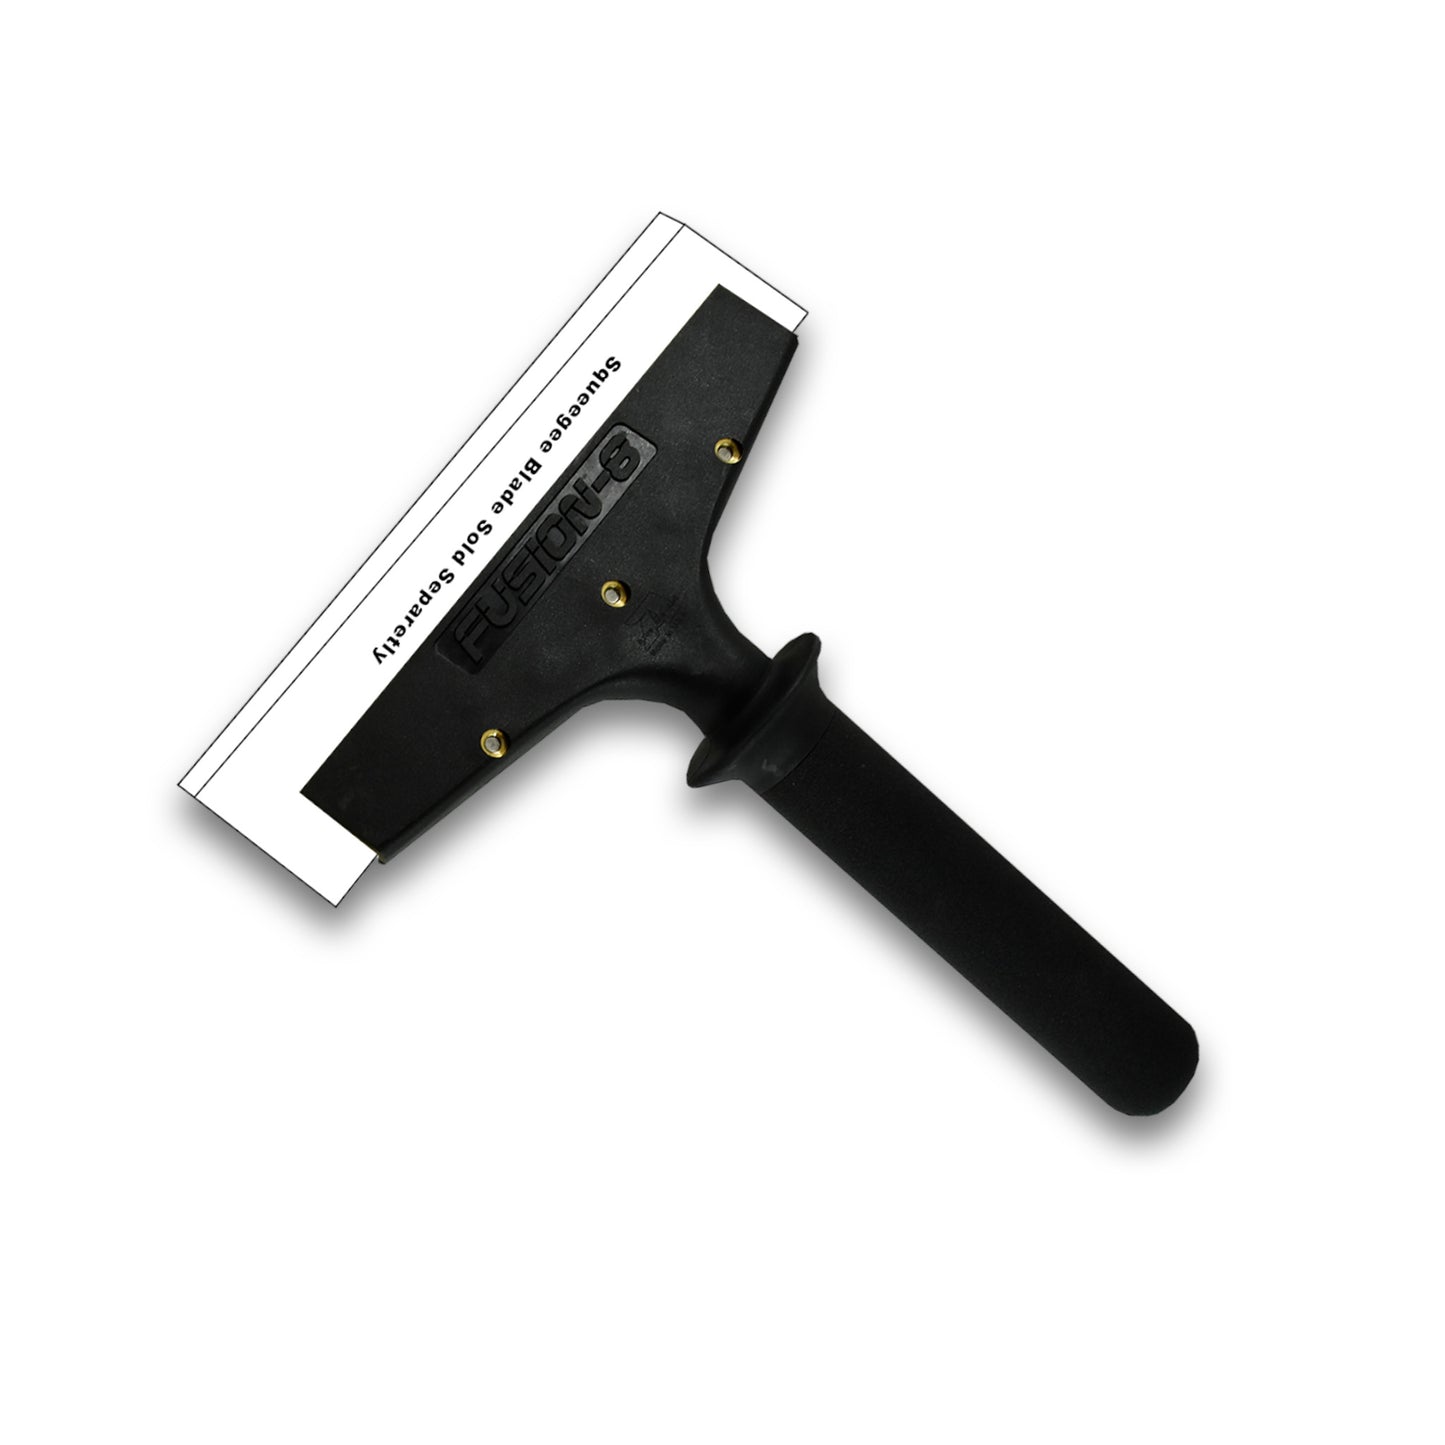 8" Fusion Grip Squeegee Handle